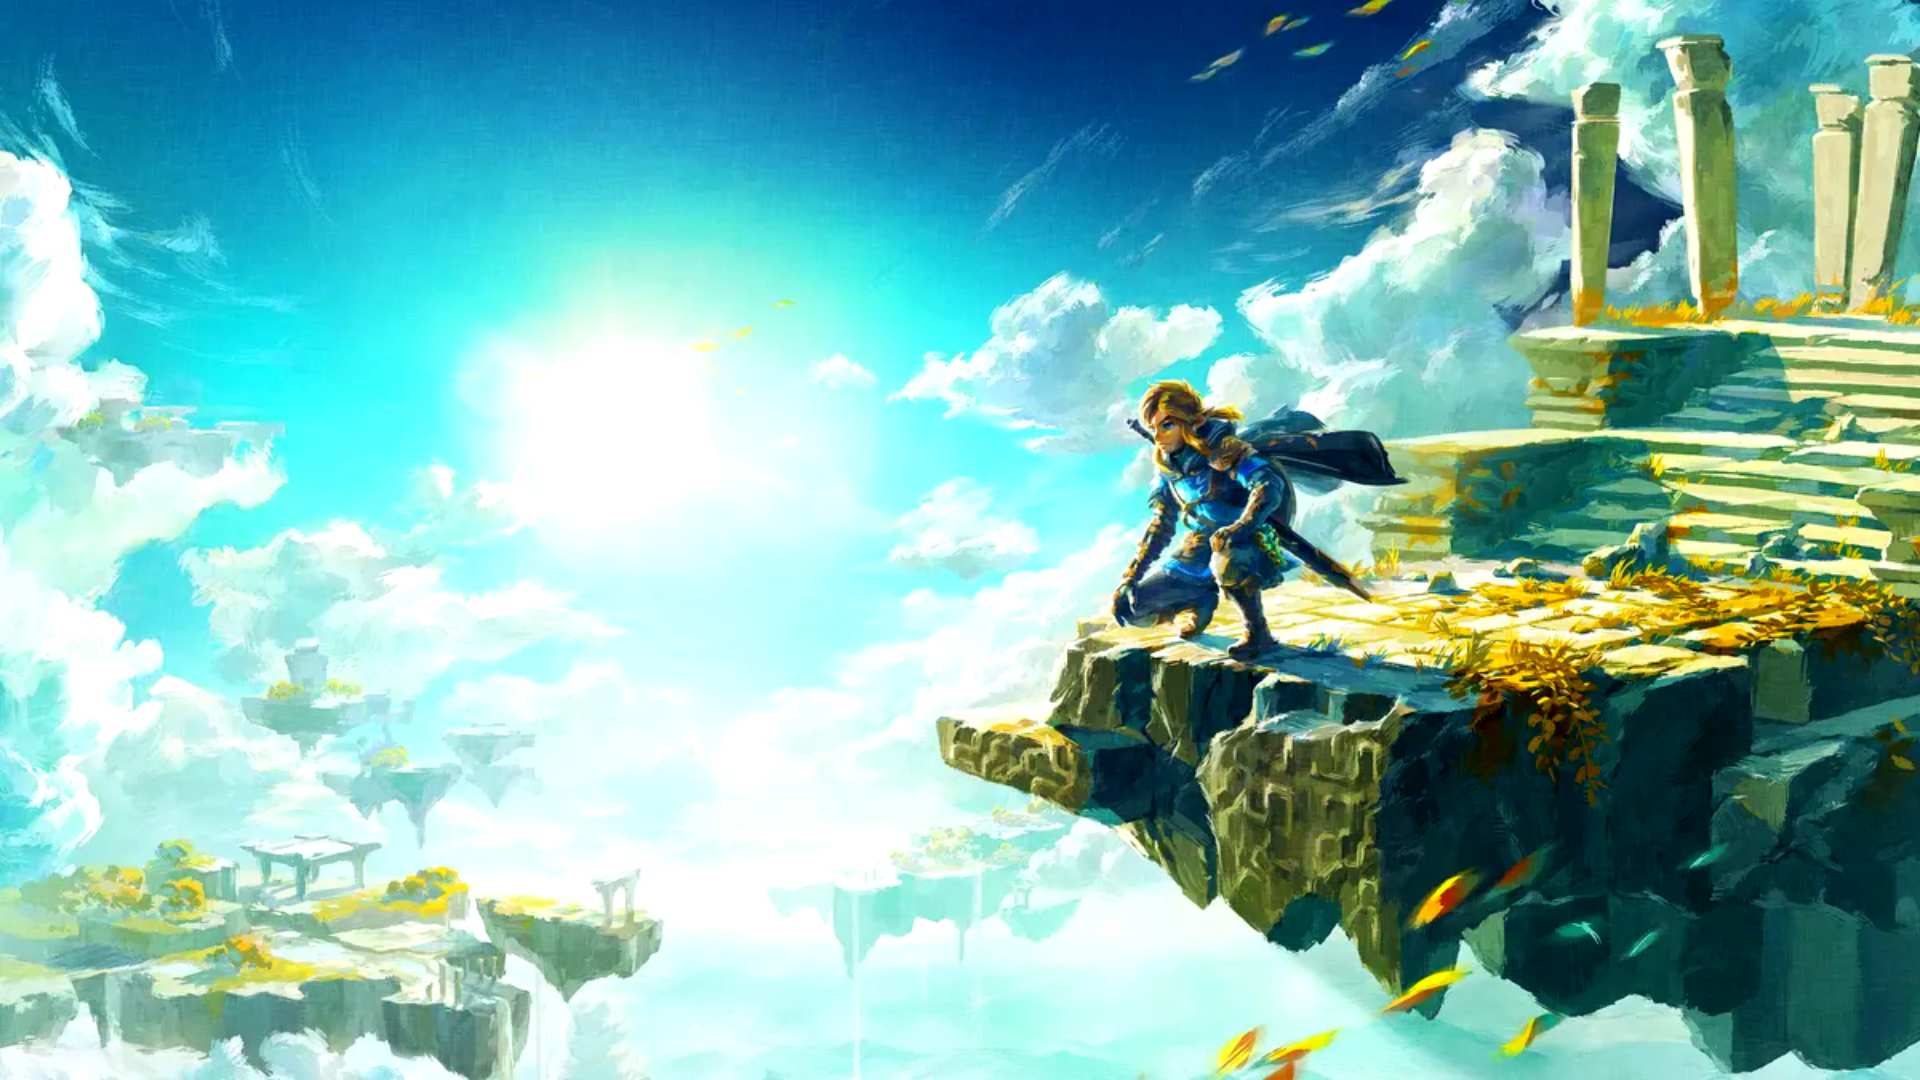 Tears of The Kingdom presents a Hyrule that's familiar yet different.